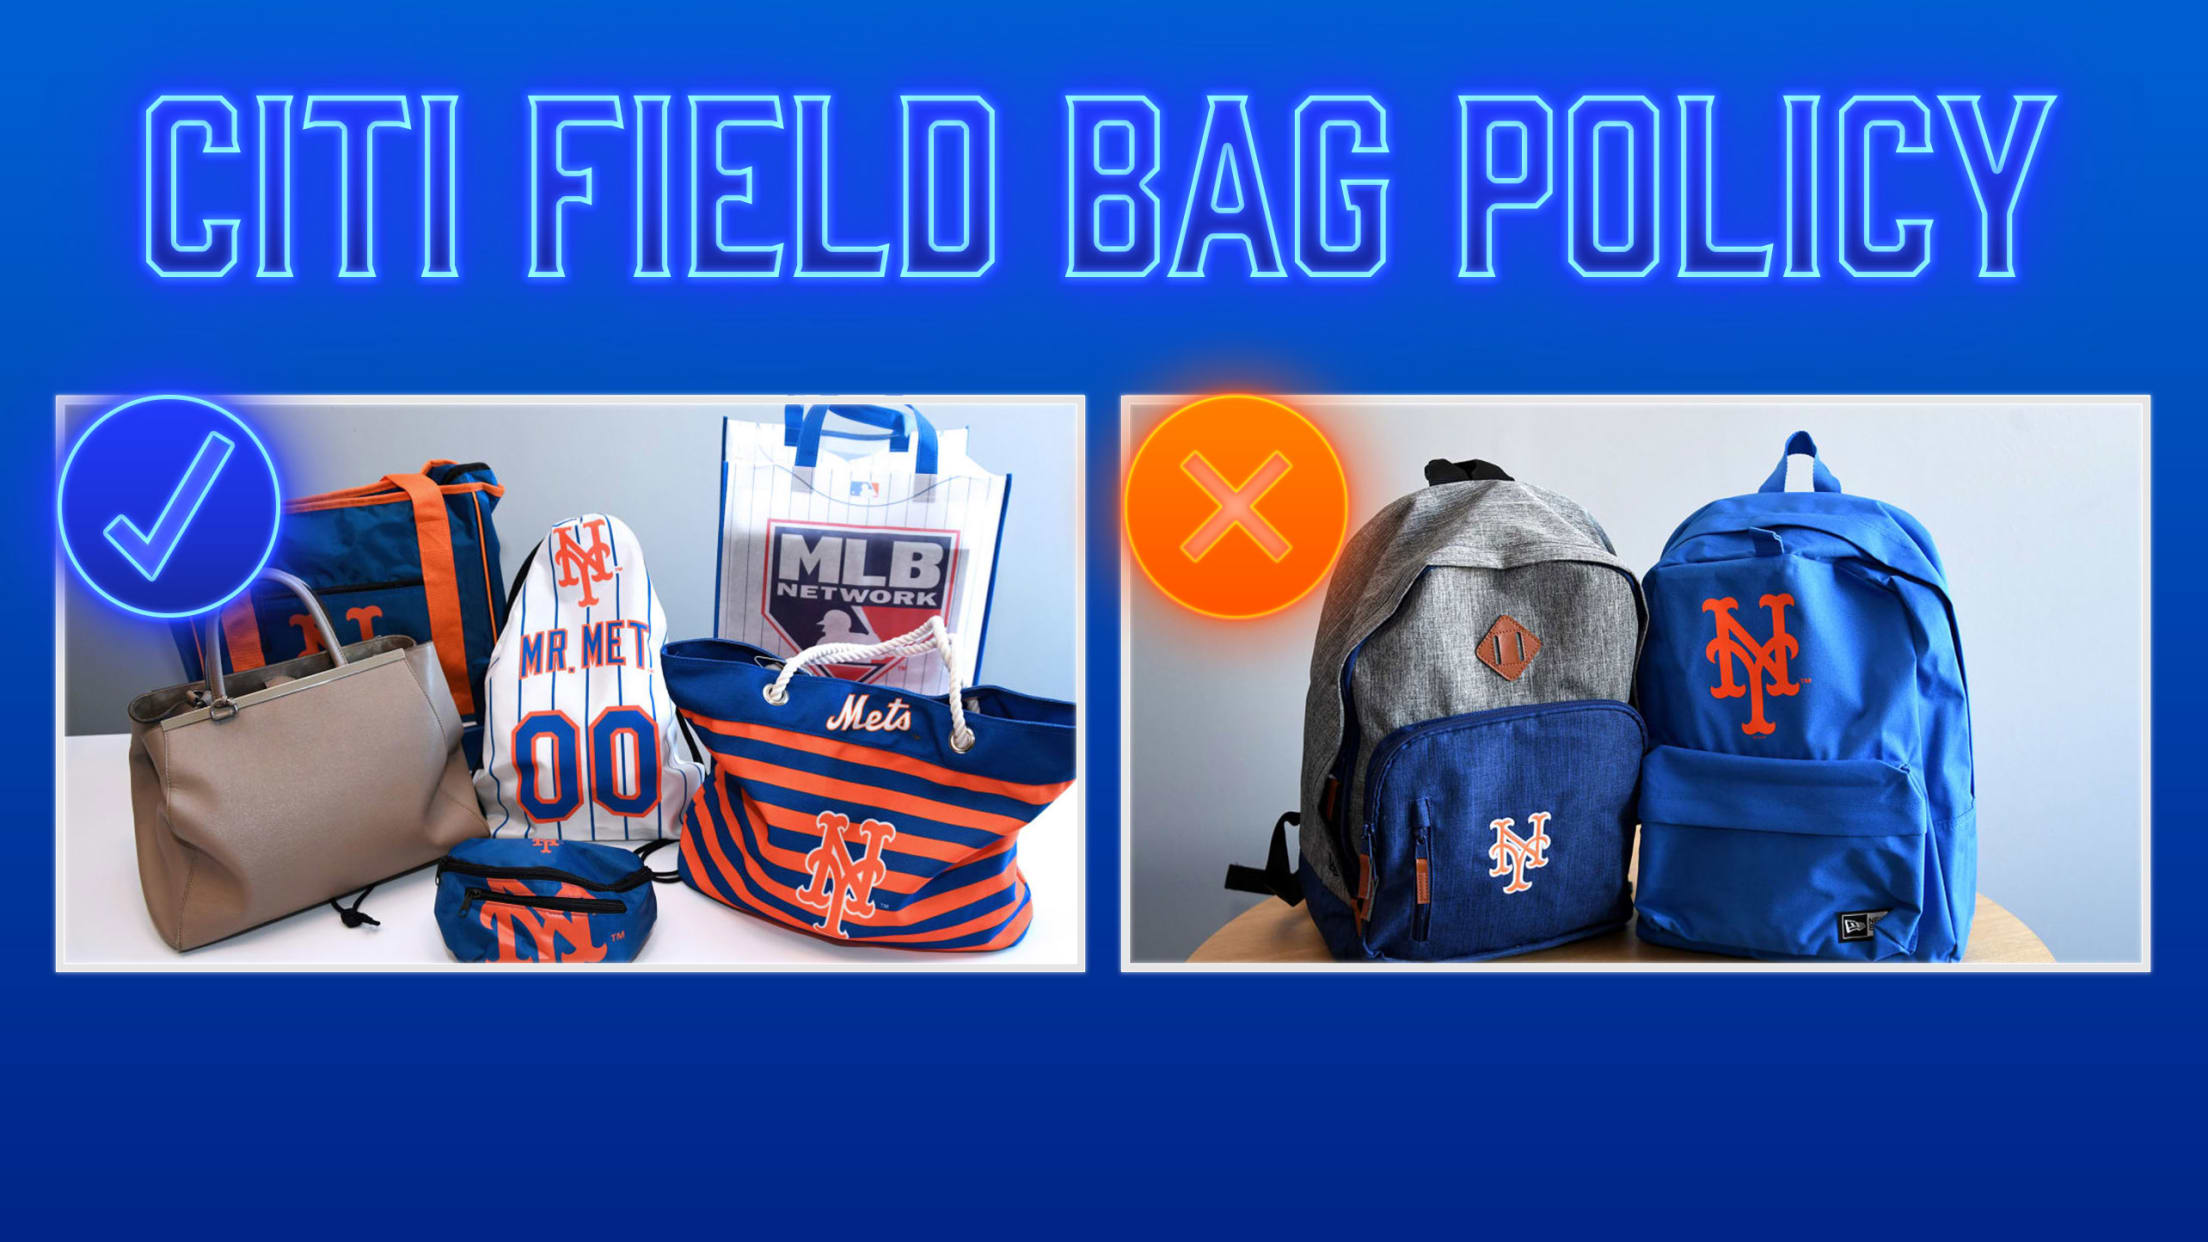 Sports fan alert: Check the purse/bag policy before heading to the game